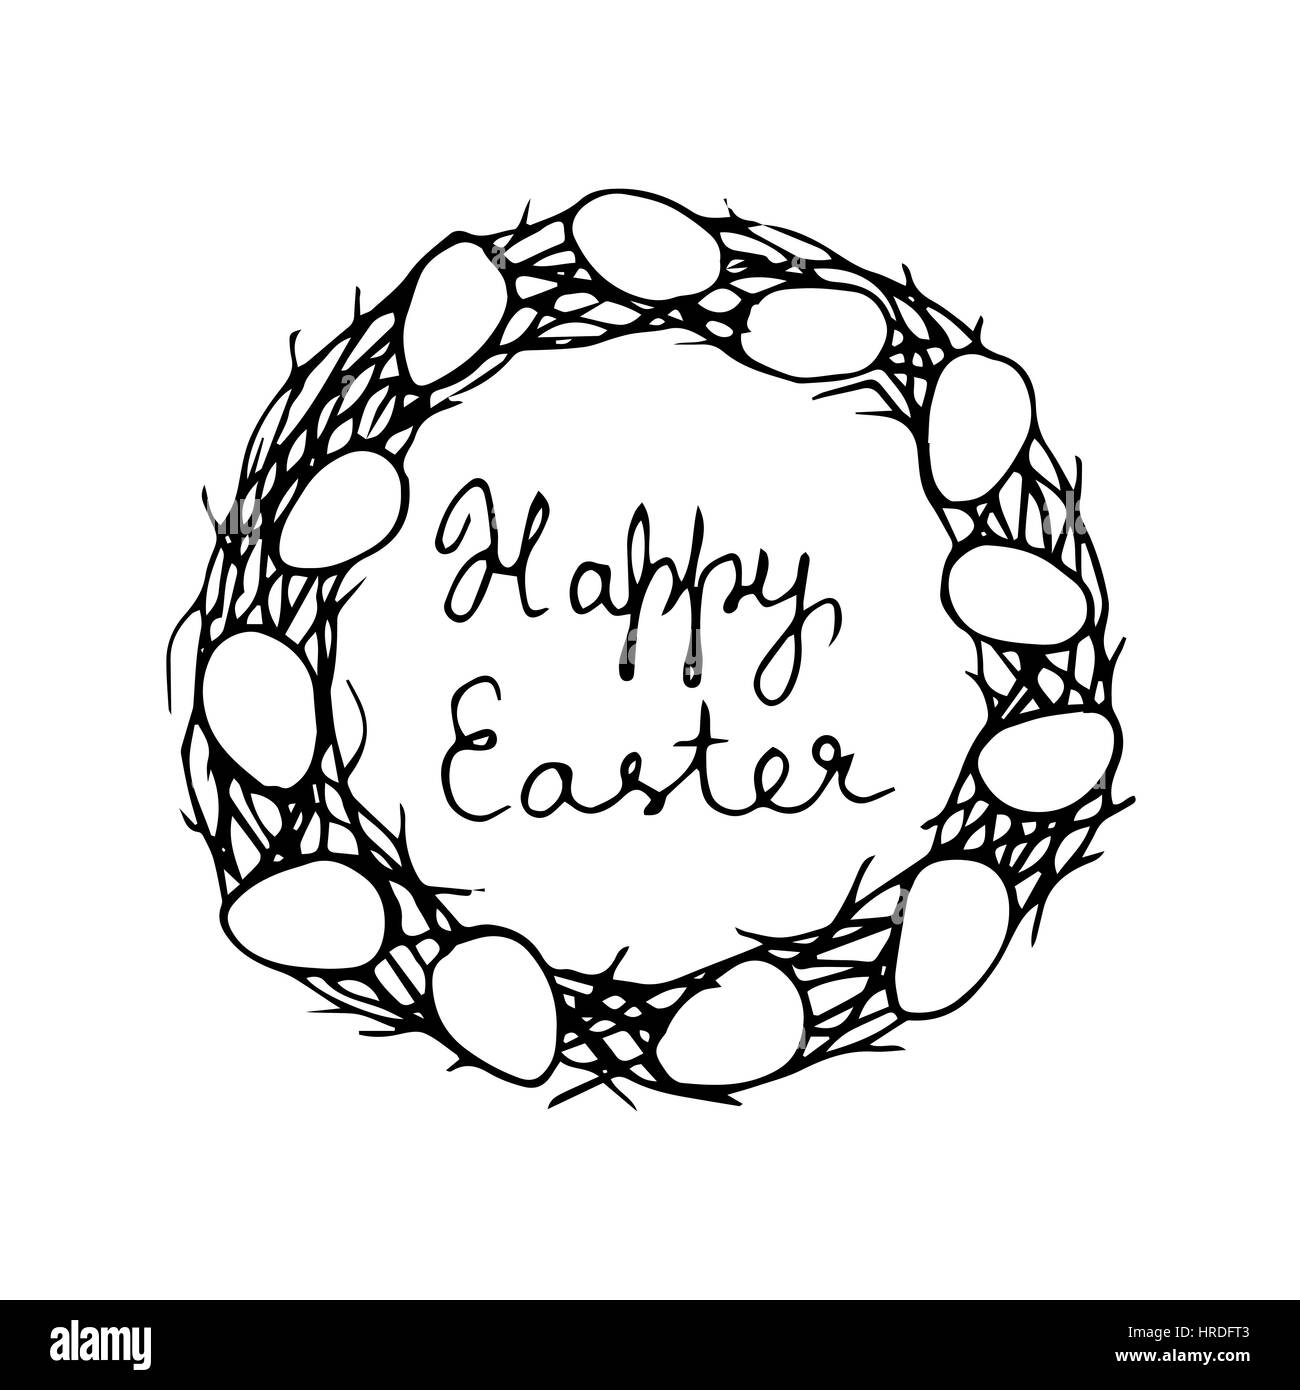 Happy easter card with eggs? lettering and wreath. Typographical Background. sketch. Hand drawn. Brush pen. Garland, spring theme. Floral ornament. Fo Stock Vector